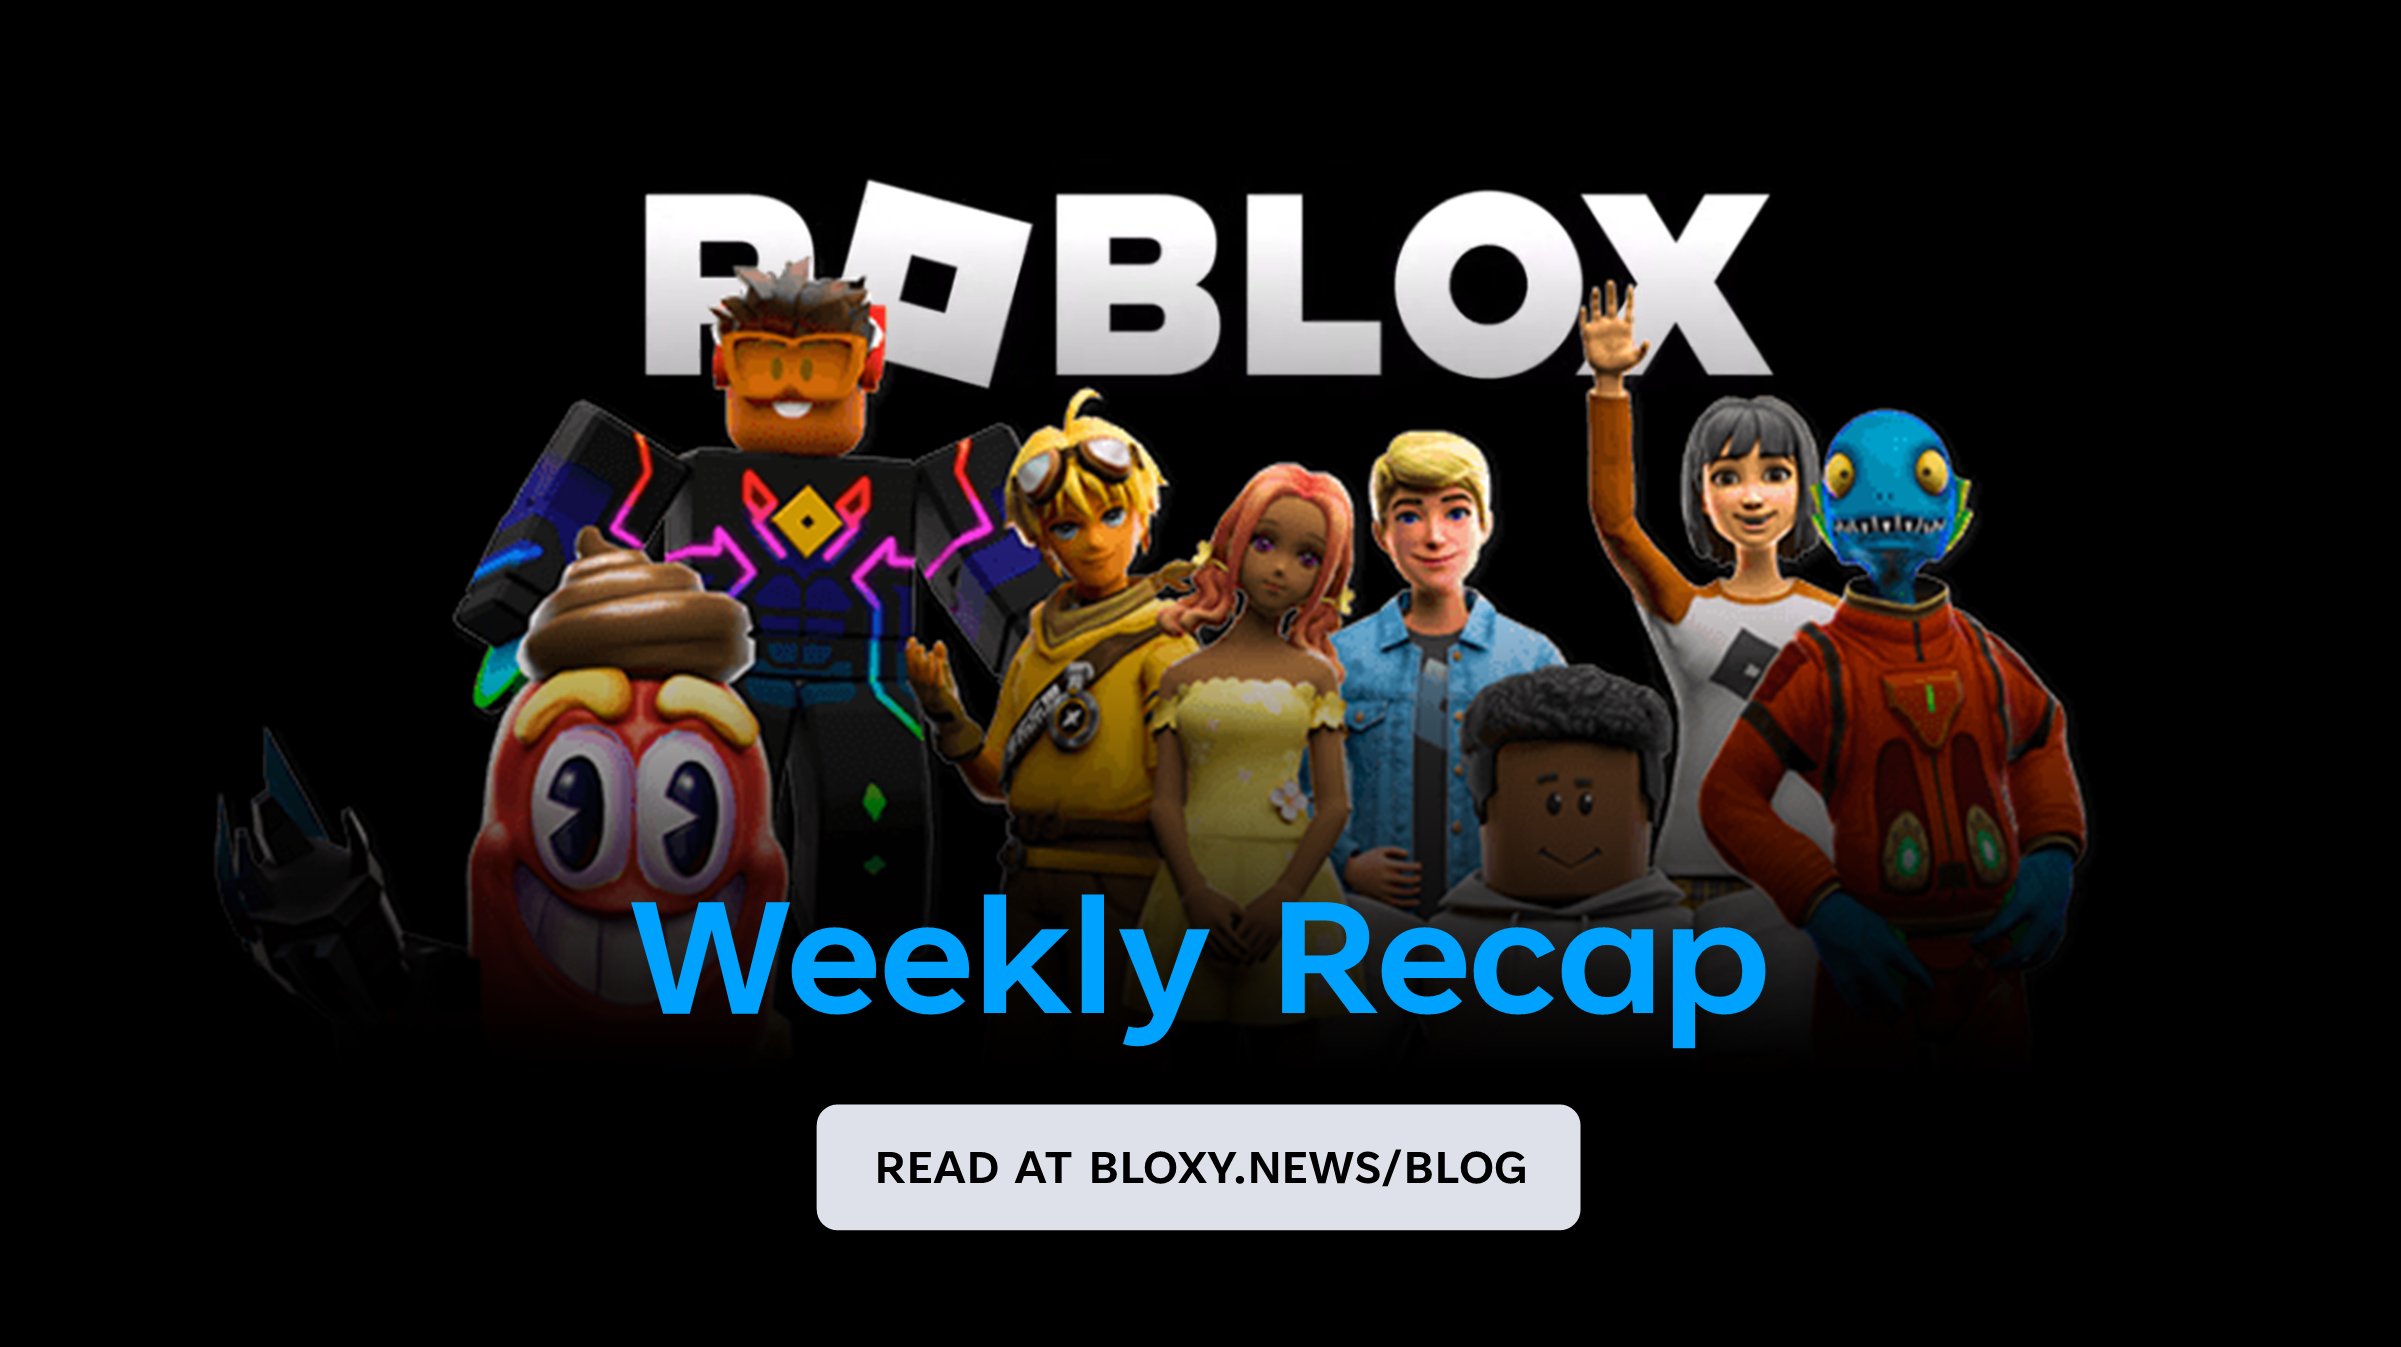 News roblox on X: @dianacute_6 @Jloyd_daily But roblox is offline look   / X